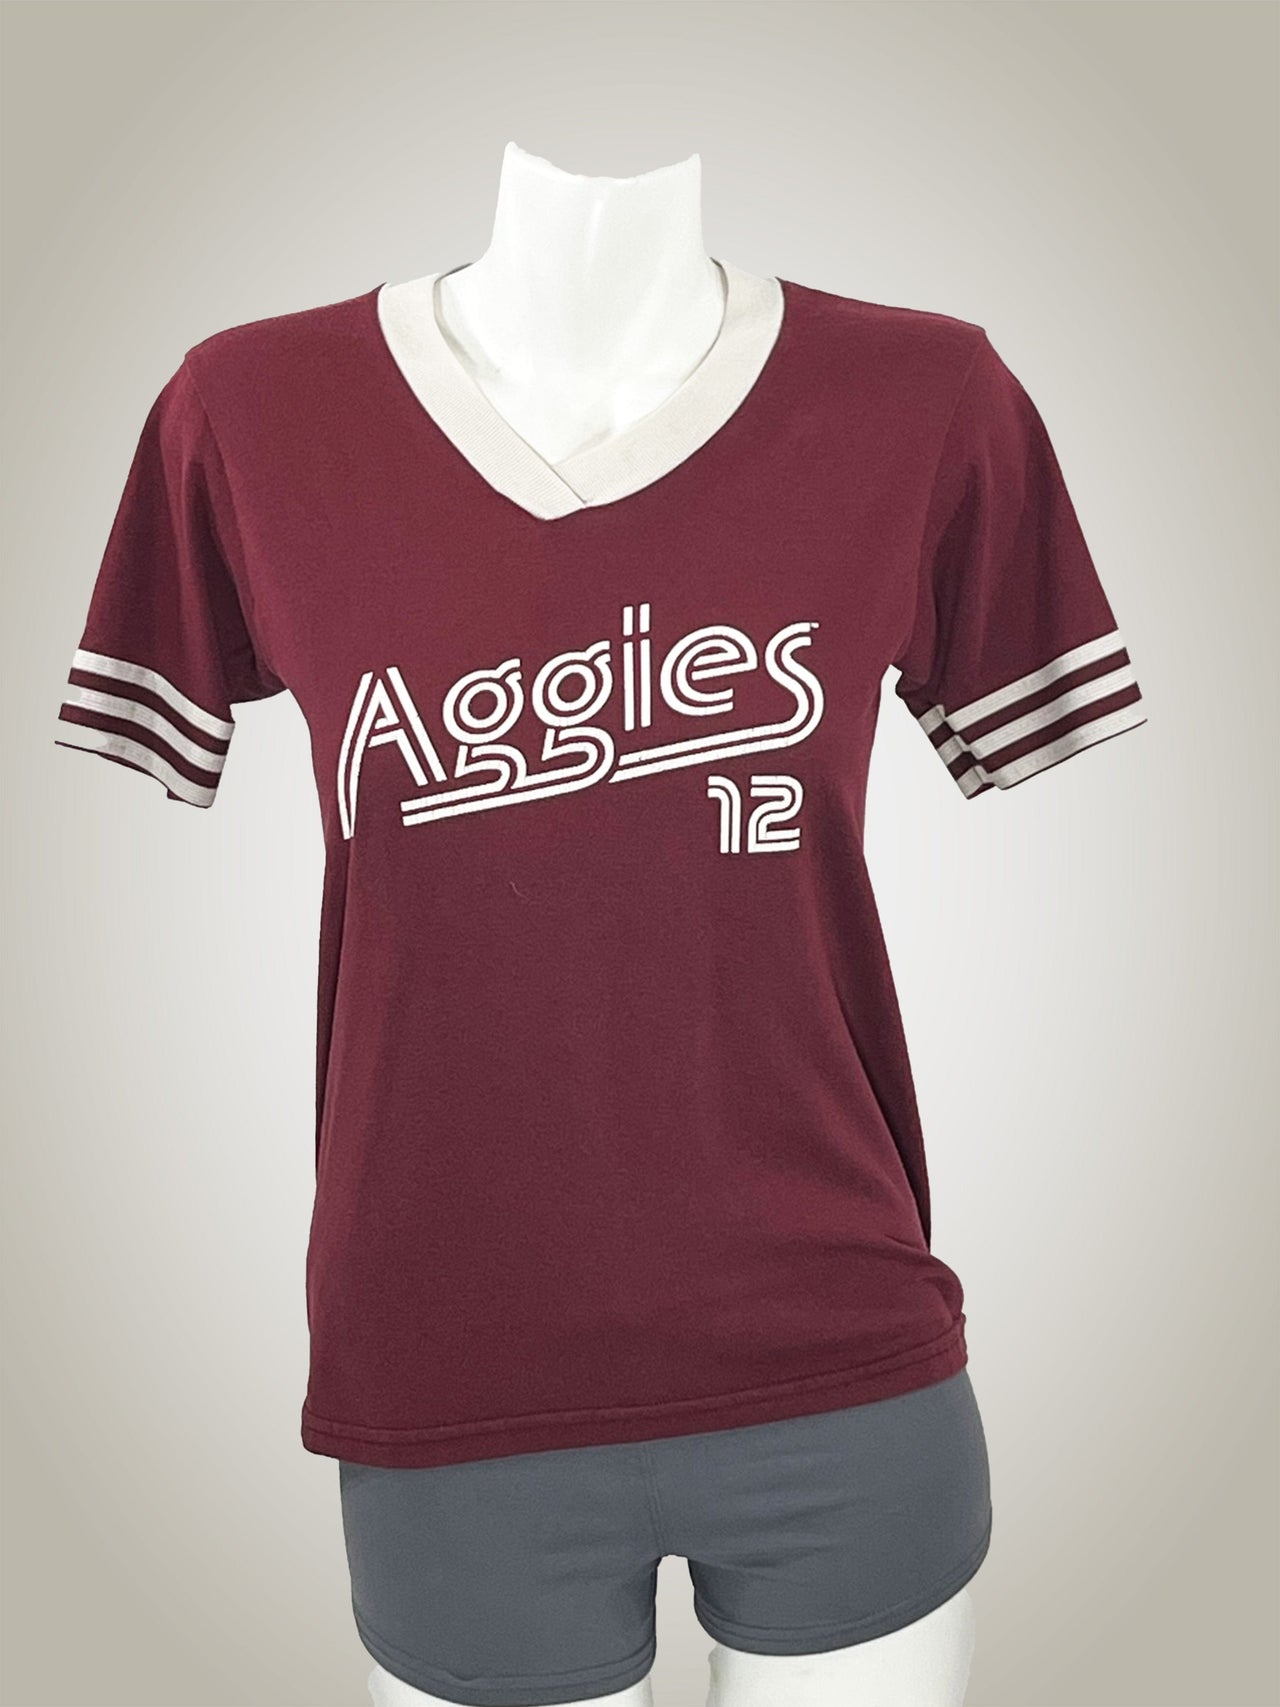 Gameday Grails T-Shirt Youth Large Vintage Texas A&M Aggies 12th Man Youth T-Shirt